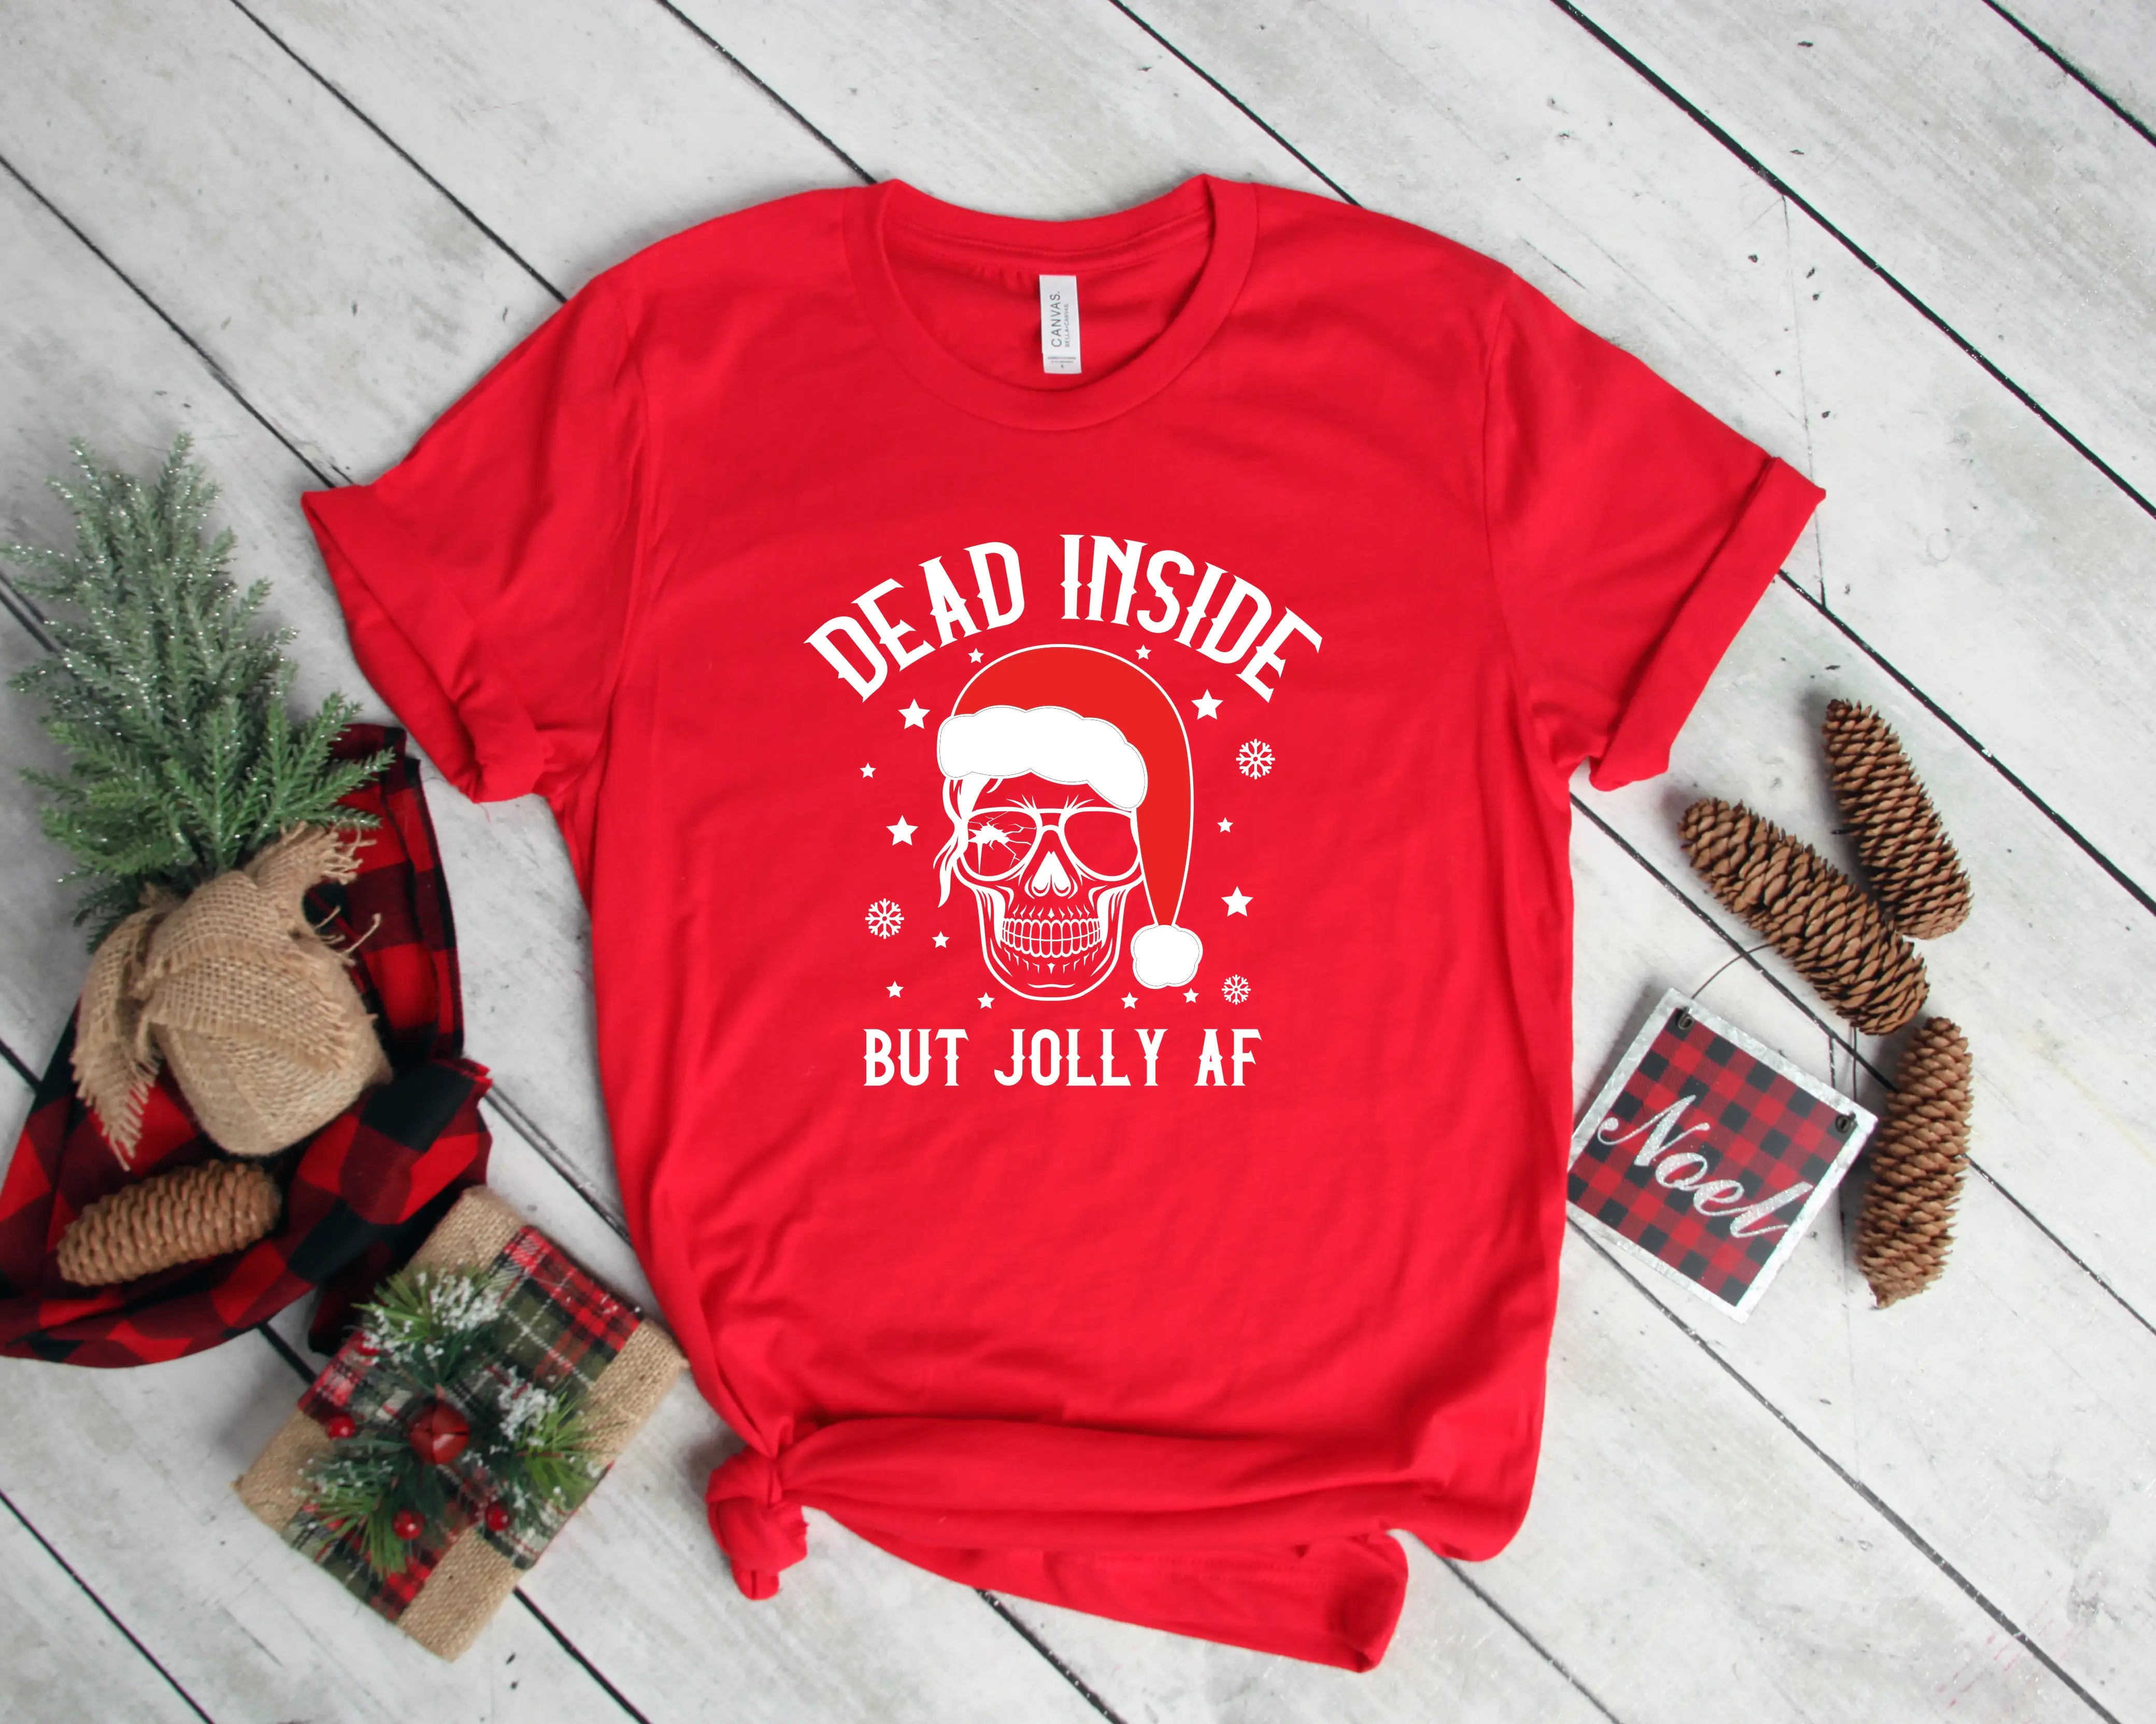 A festive Dead Inside But Jolly AF Christmas Skeleton Shirt with holiday decorations and casual attire, available in unisex sizes.